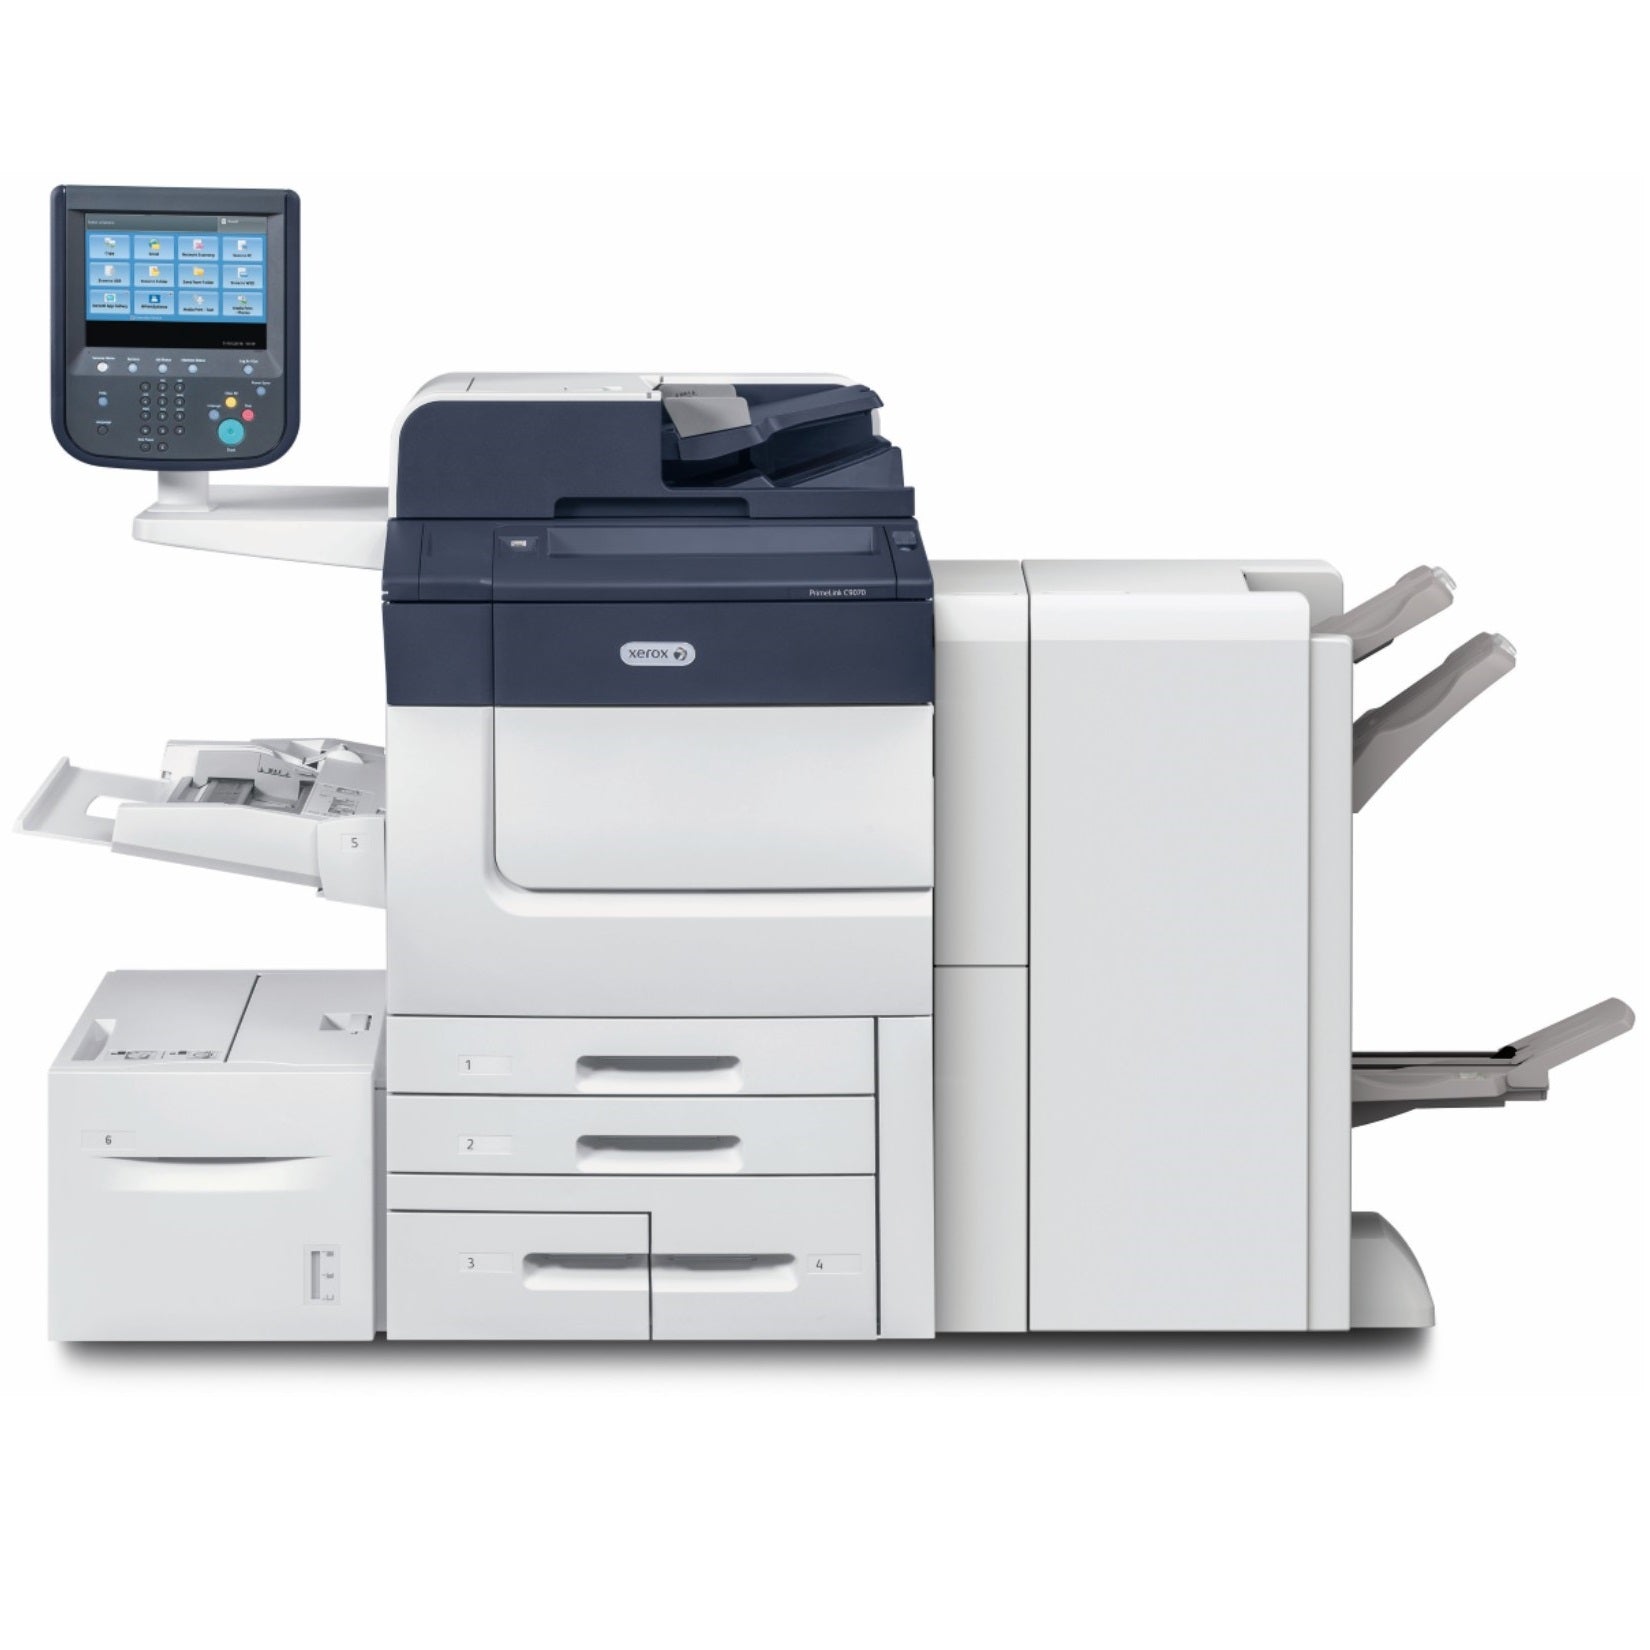 Xerox PrimeLink C9070 Color Laser Multifunctional Printer For Office/Workgroup or Production Printing | World's #1 Production Color Printer